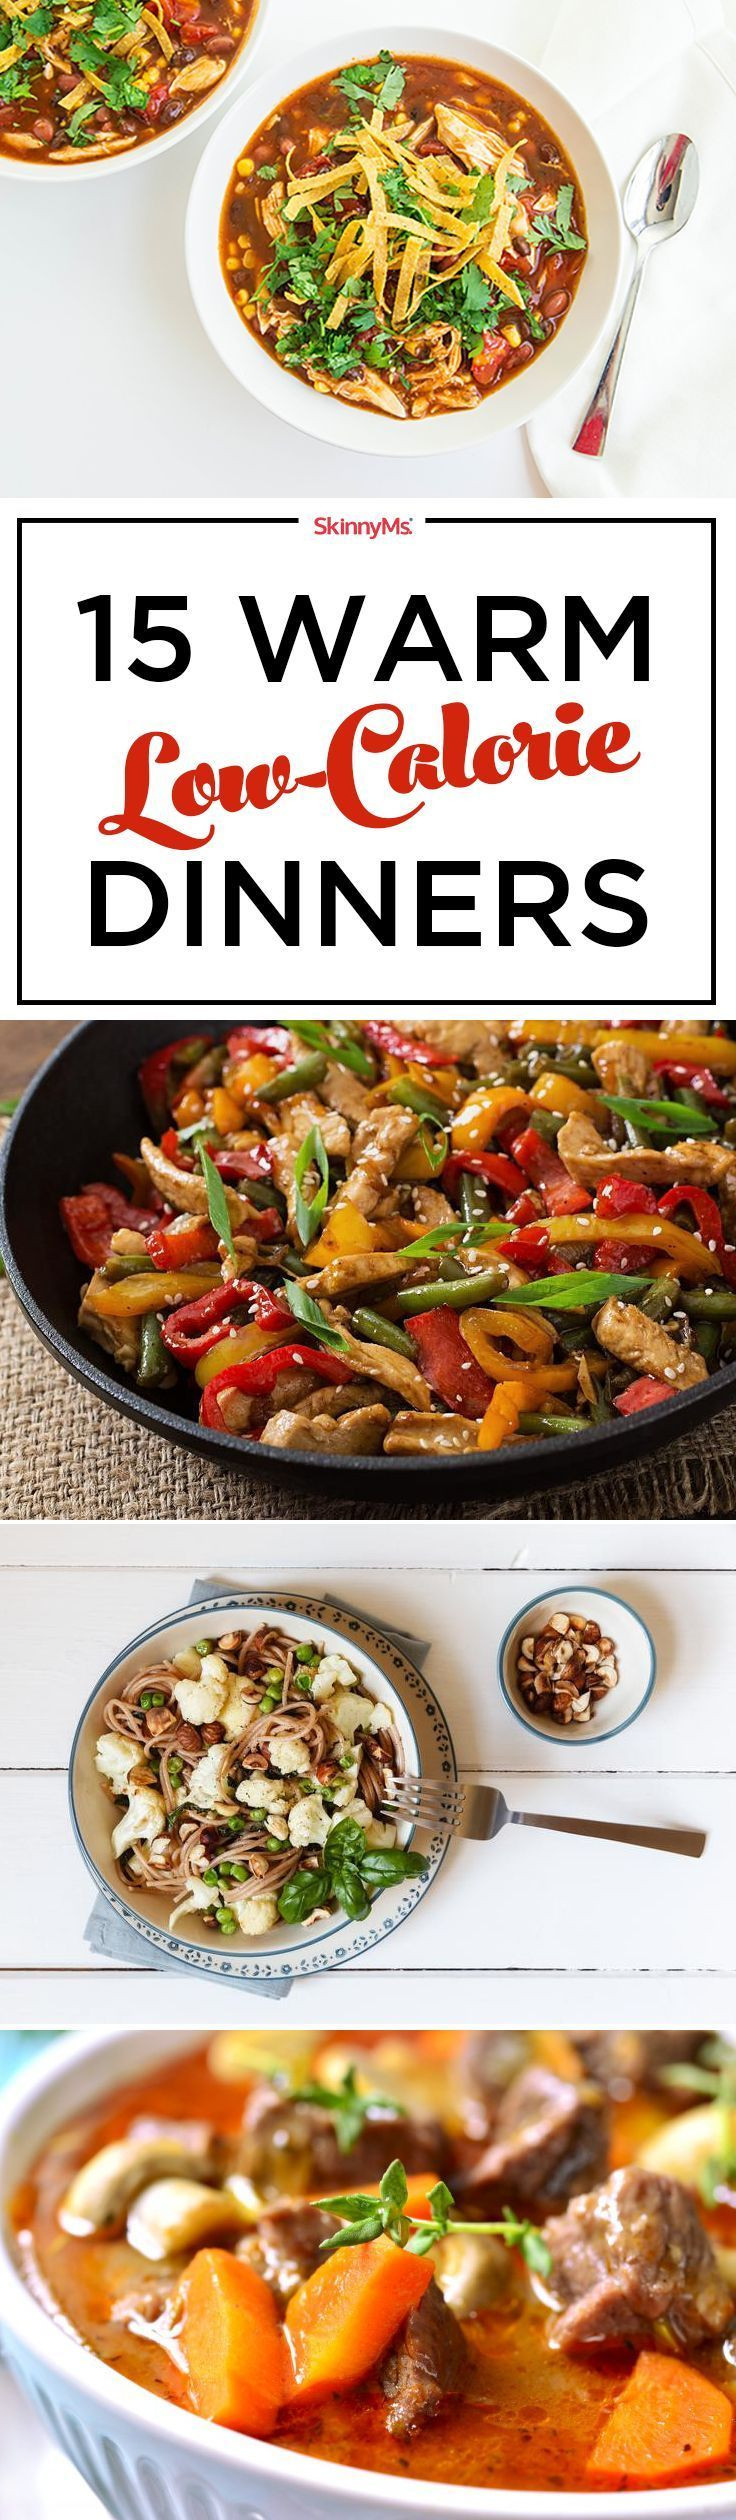 Low Calorie Dinners For 2
 1240 best images about Low Calorie Options on Pinterest